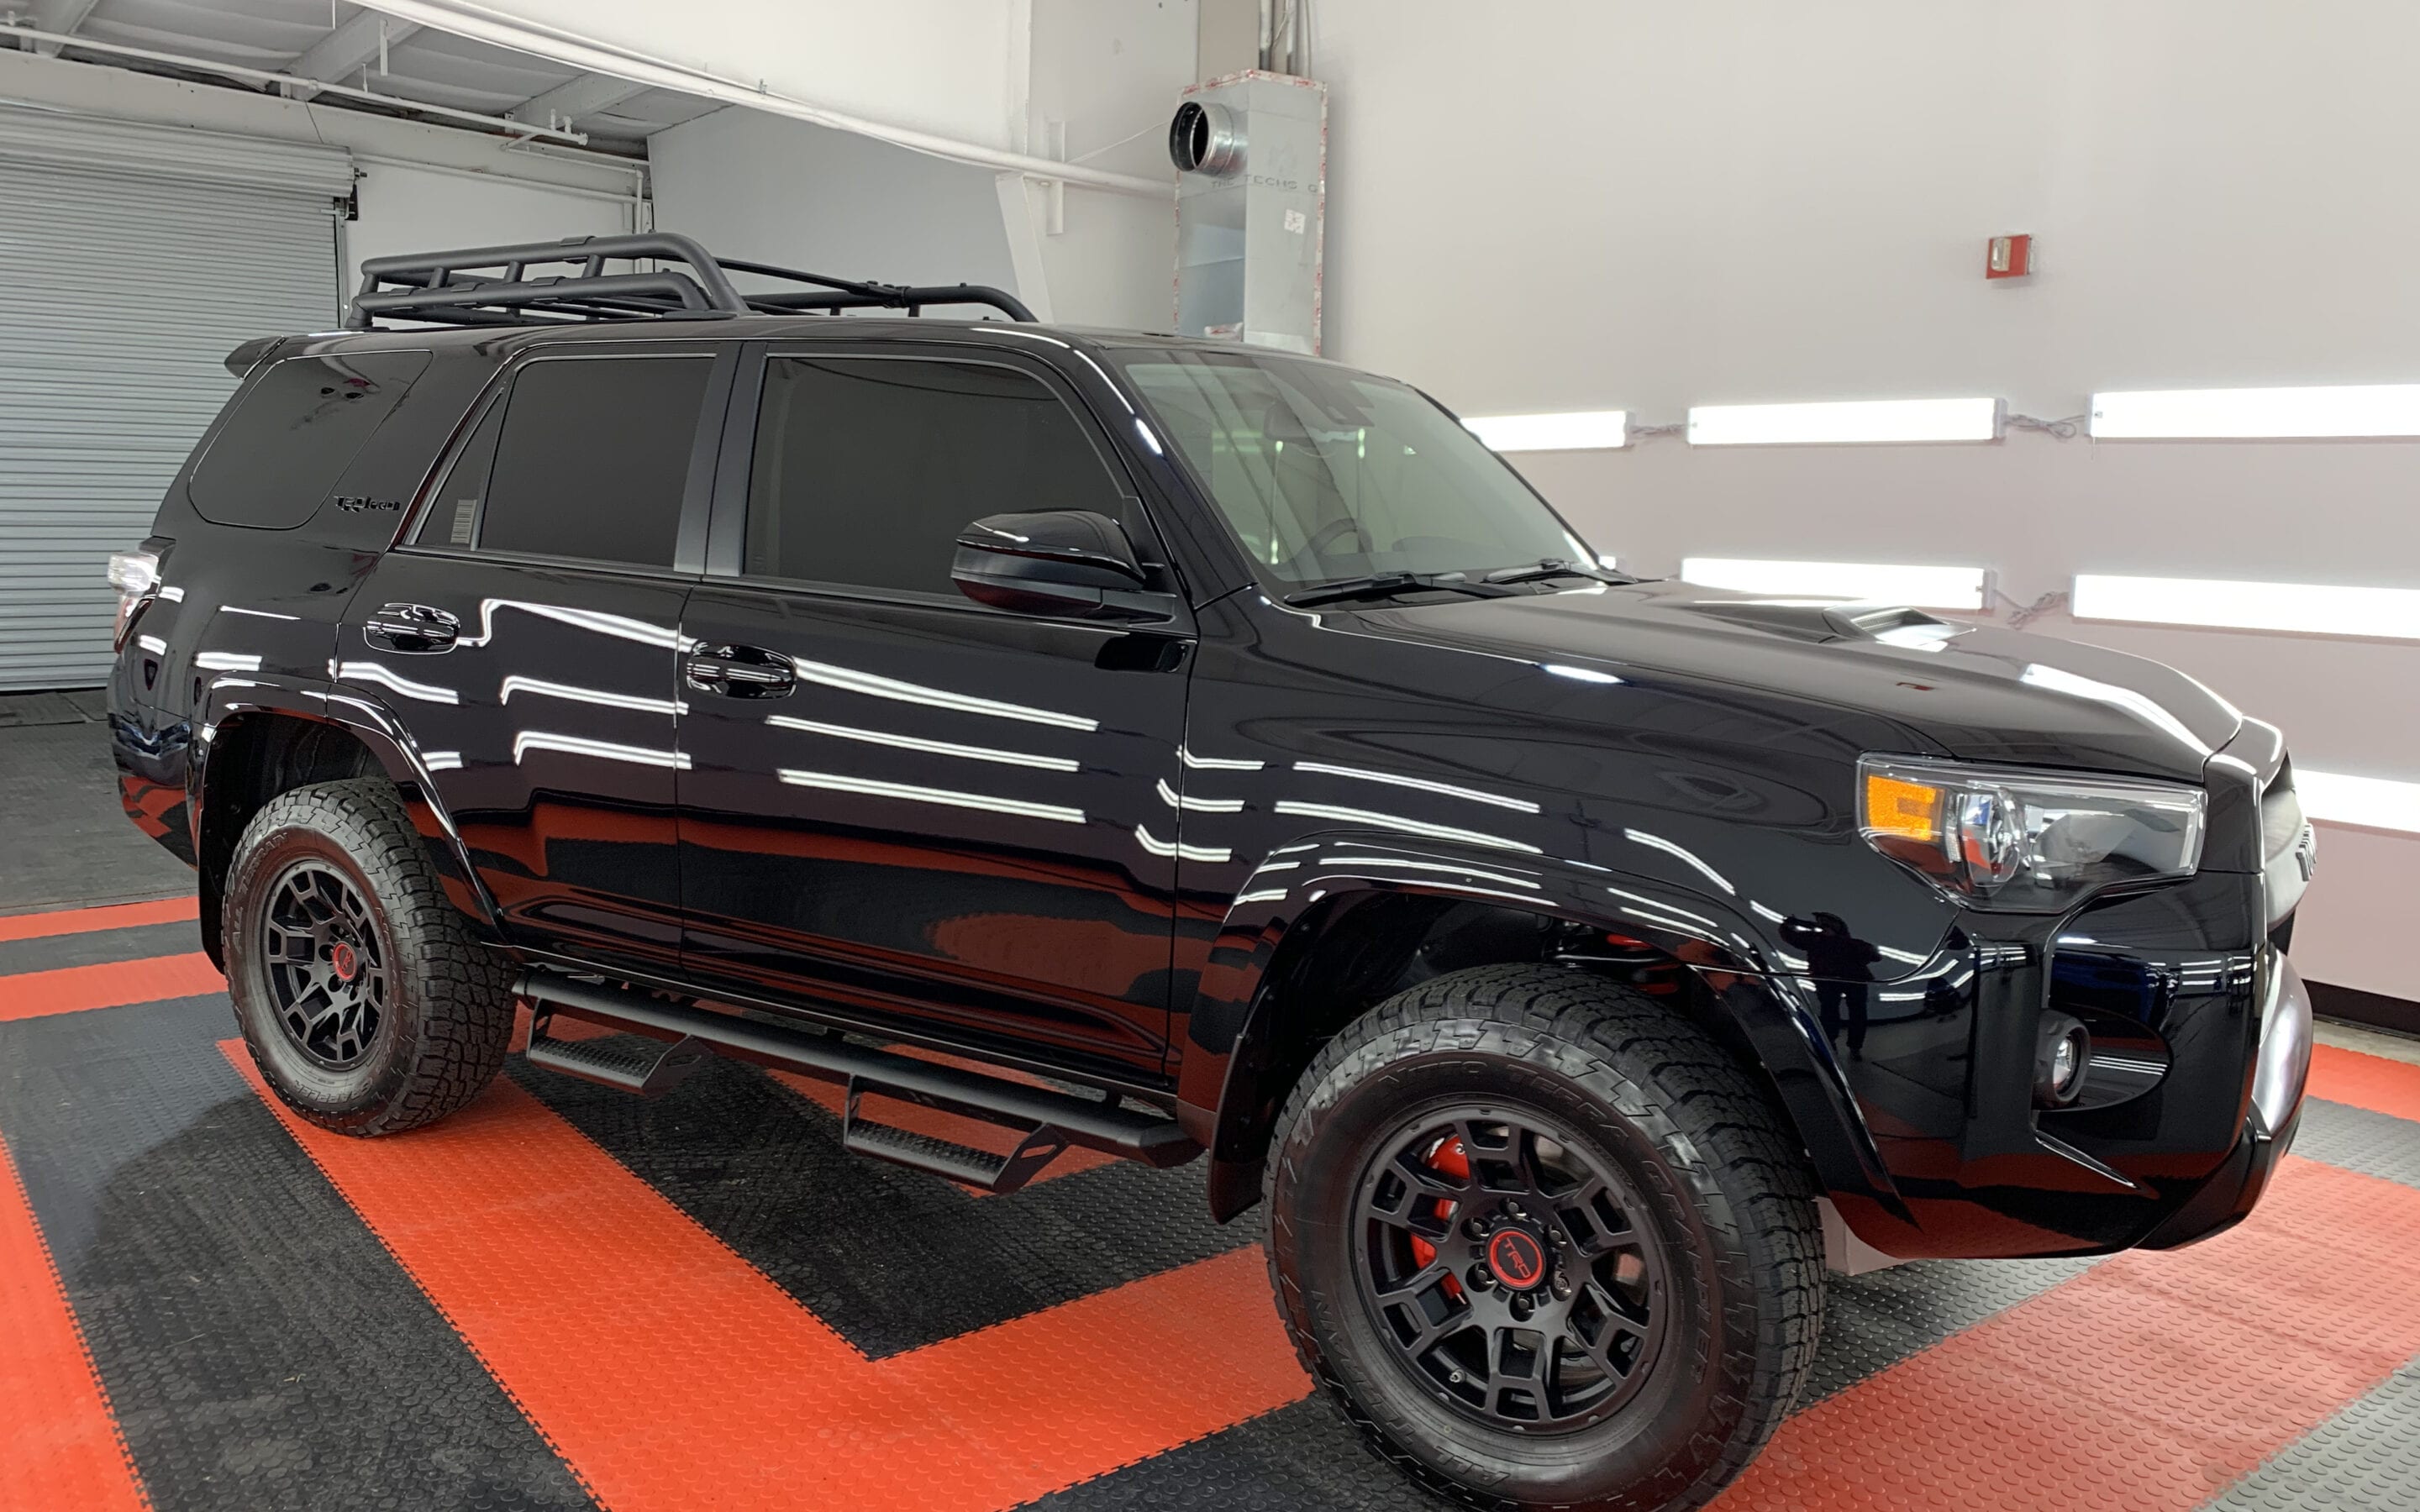 Photo of a New Car Preparation of a 2021 Toyota 4Runner